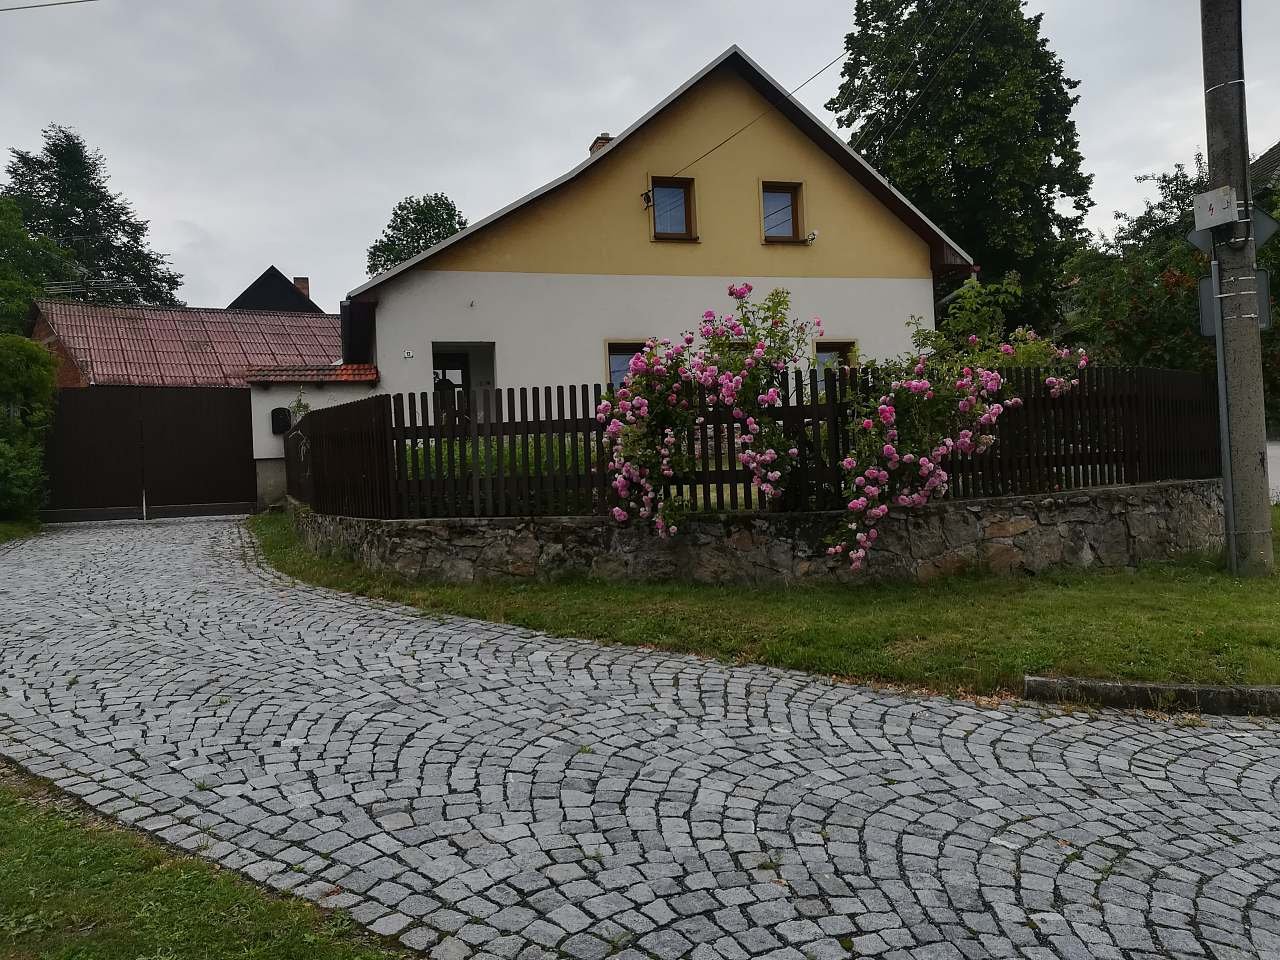 Cottage, driveway and parking